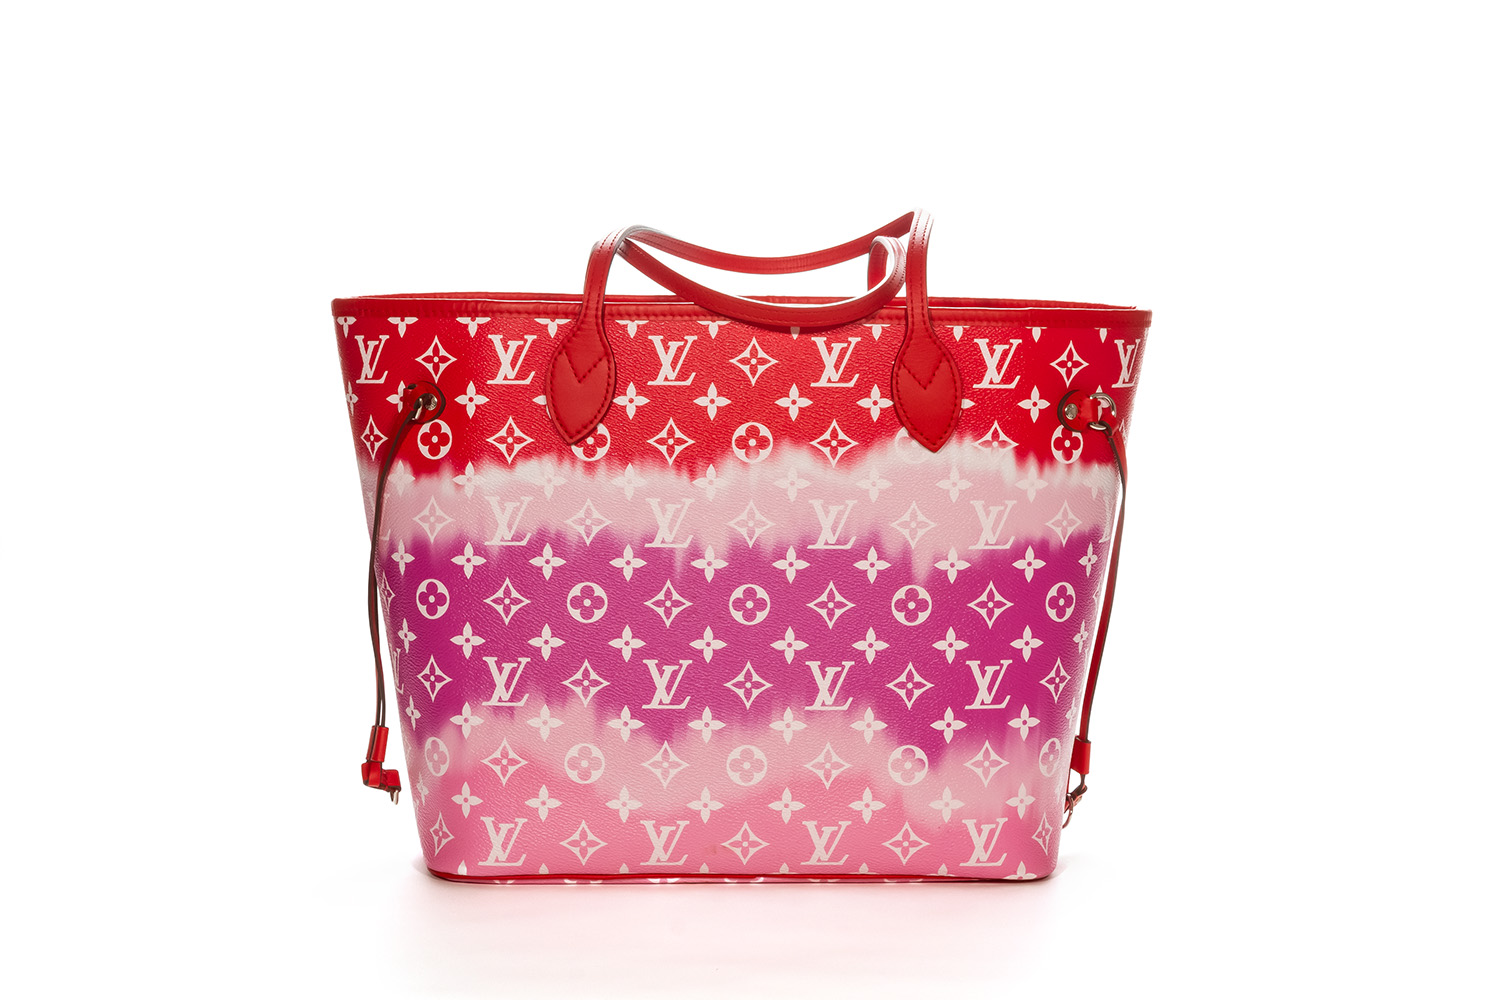 LOUIS VUITTON Escale Neverfull MM Tote Bag Pouch M45127 Red Pink Purse Auth  New